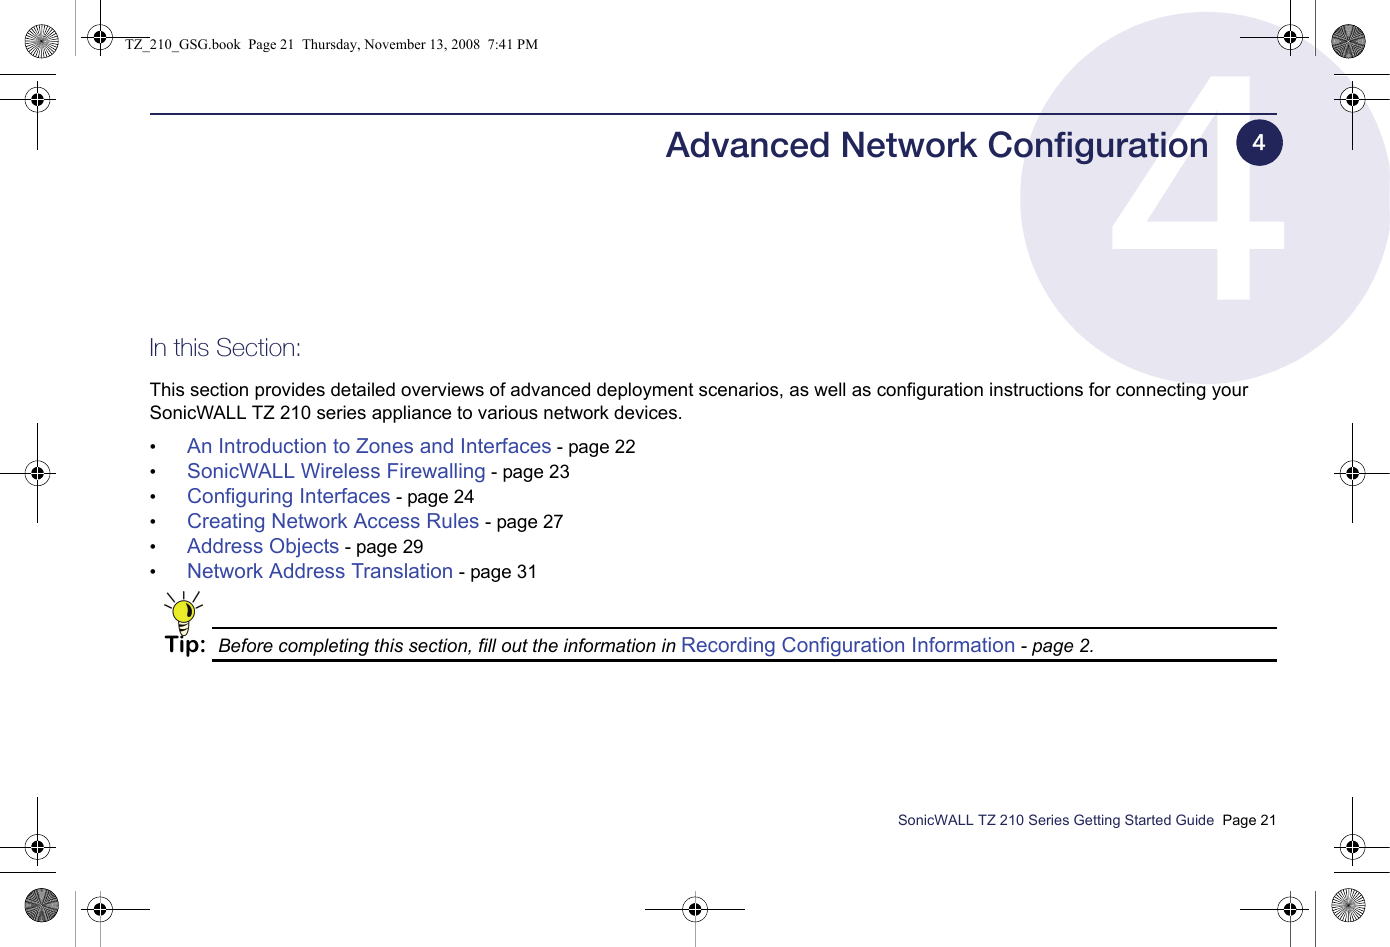 SonicWALL TZ 210 Series Getting Started Guide  Page 21Advanced Network ConfigurationIn this Section:This section provides detailed overviews of advanced deployment scenarios, as well as configuration instructions for connecting your SonicWALL TZ 210 series appliance to various network devices.•An Introduction to Zones and Interfaces - page 22•SonicWALL Wireless Firewalling - page 23•Configuring Interfaces - page 24•Creating Network Access Rules - page 27•Address Objects - page 29•Network Address Translation - page 31Tip: Before completing this section, fill out the information in Recording Configuration Information - page 2.4TZ_210_GSG.book  Page 21  Thursday, November 13, 2008  7:41 PM